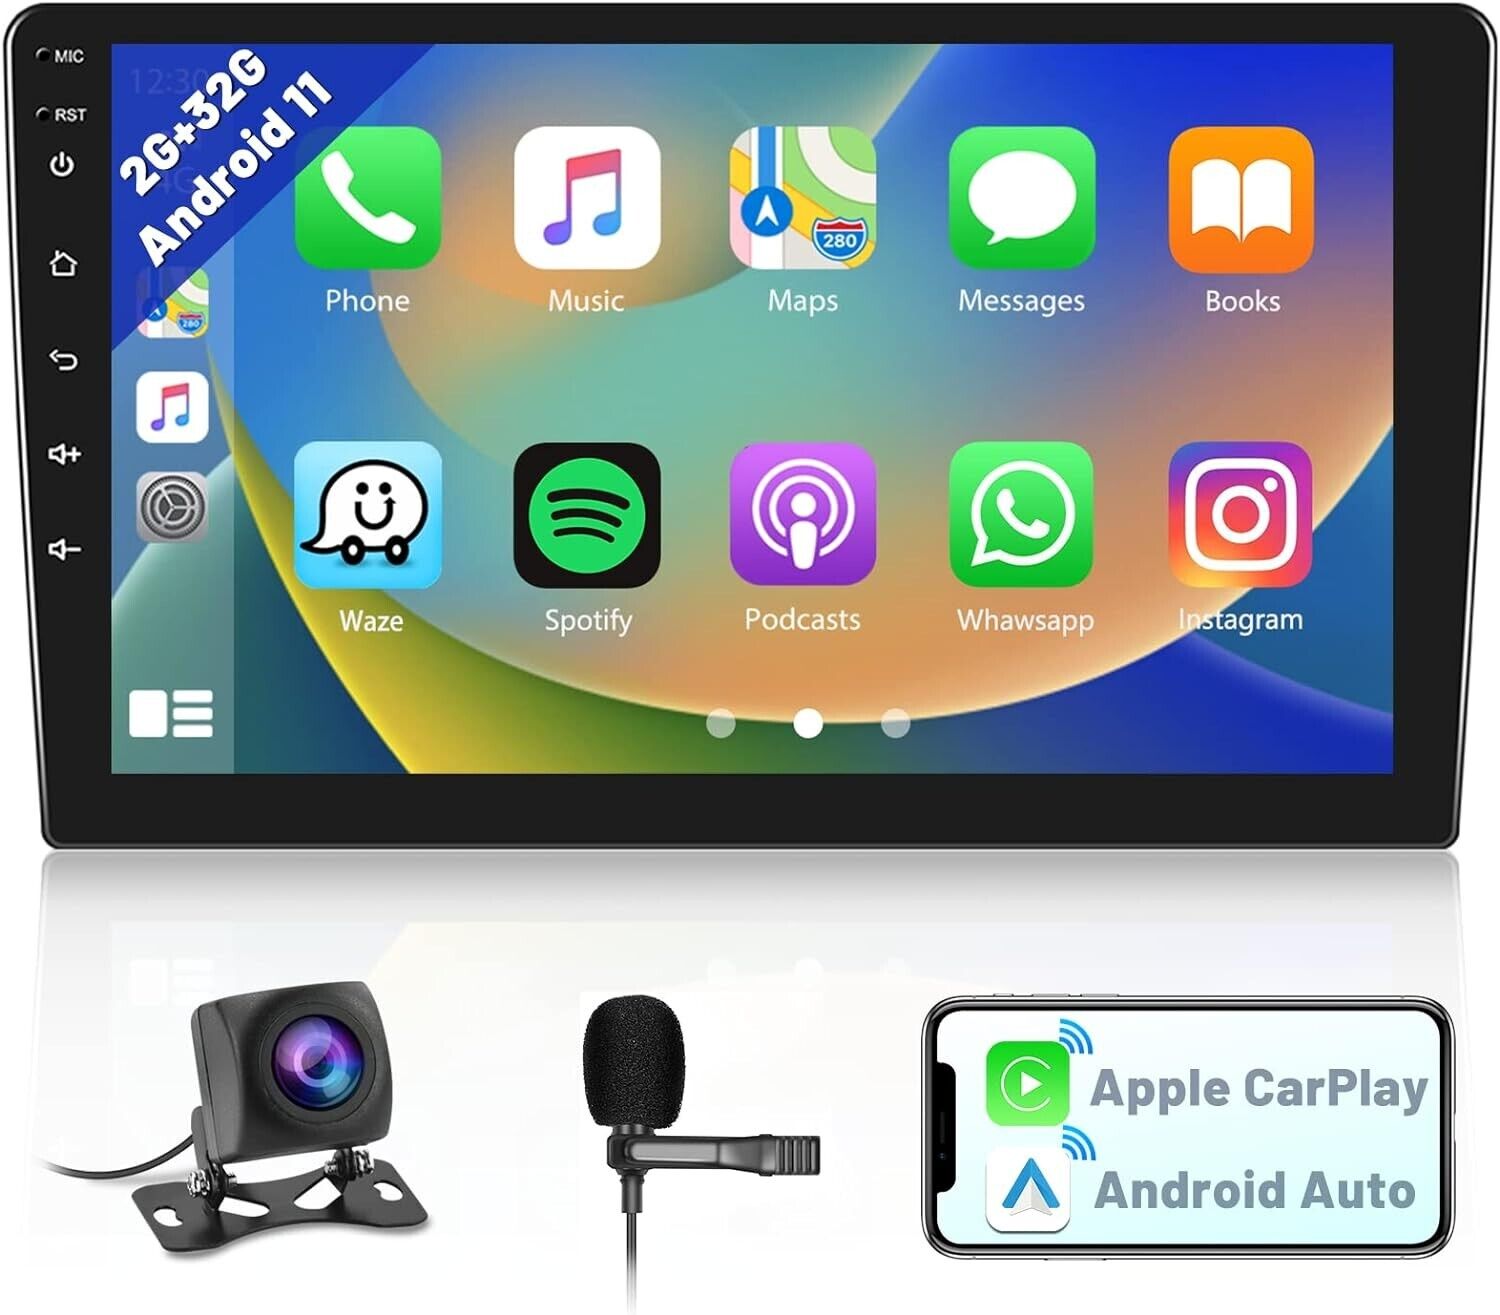 Android 11 Car Radio 1 Din Auto Radio 2G 32G Universal 10 WIFI GPS Audio  Multimedia Video Player With HD Camera